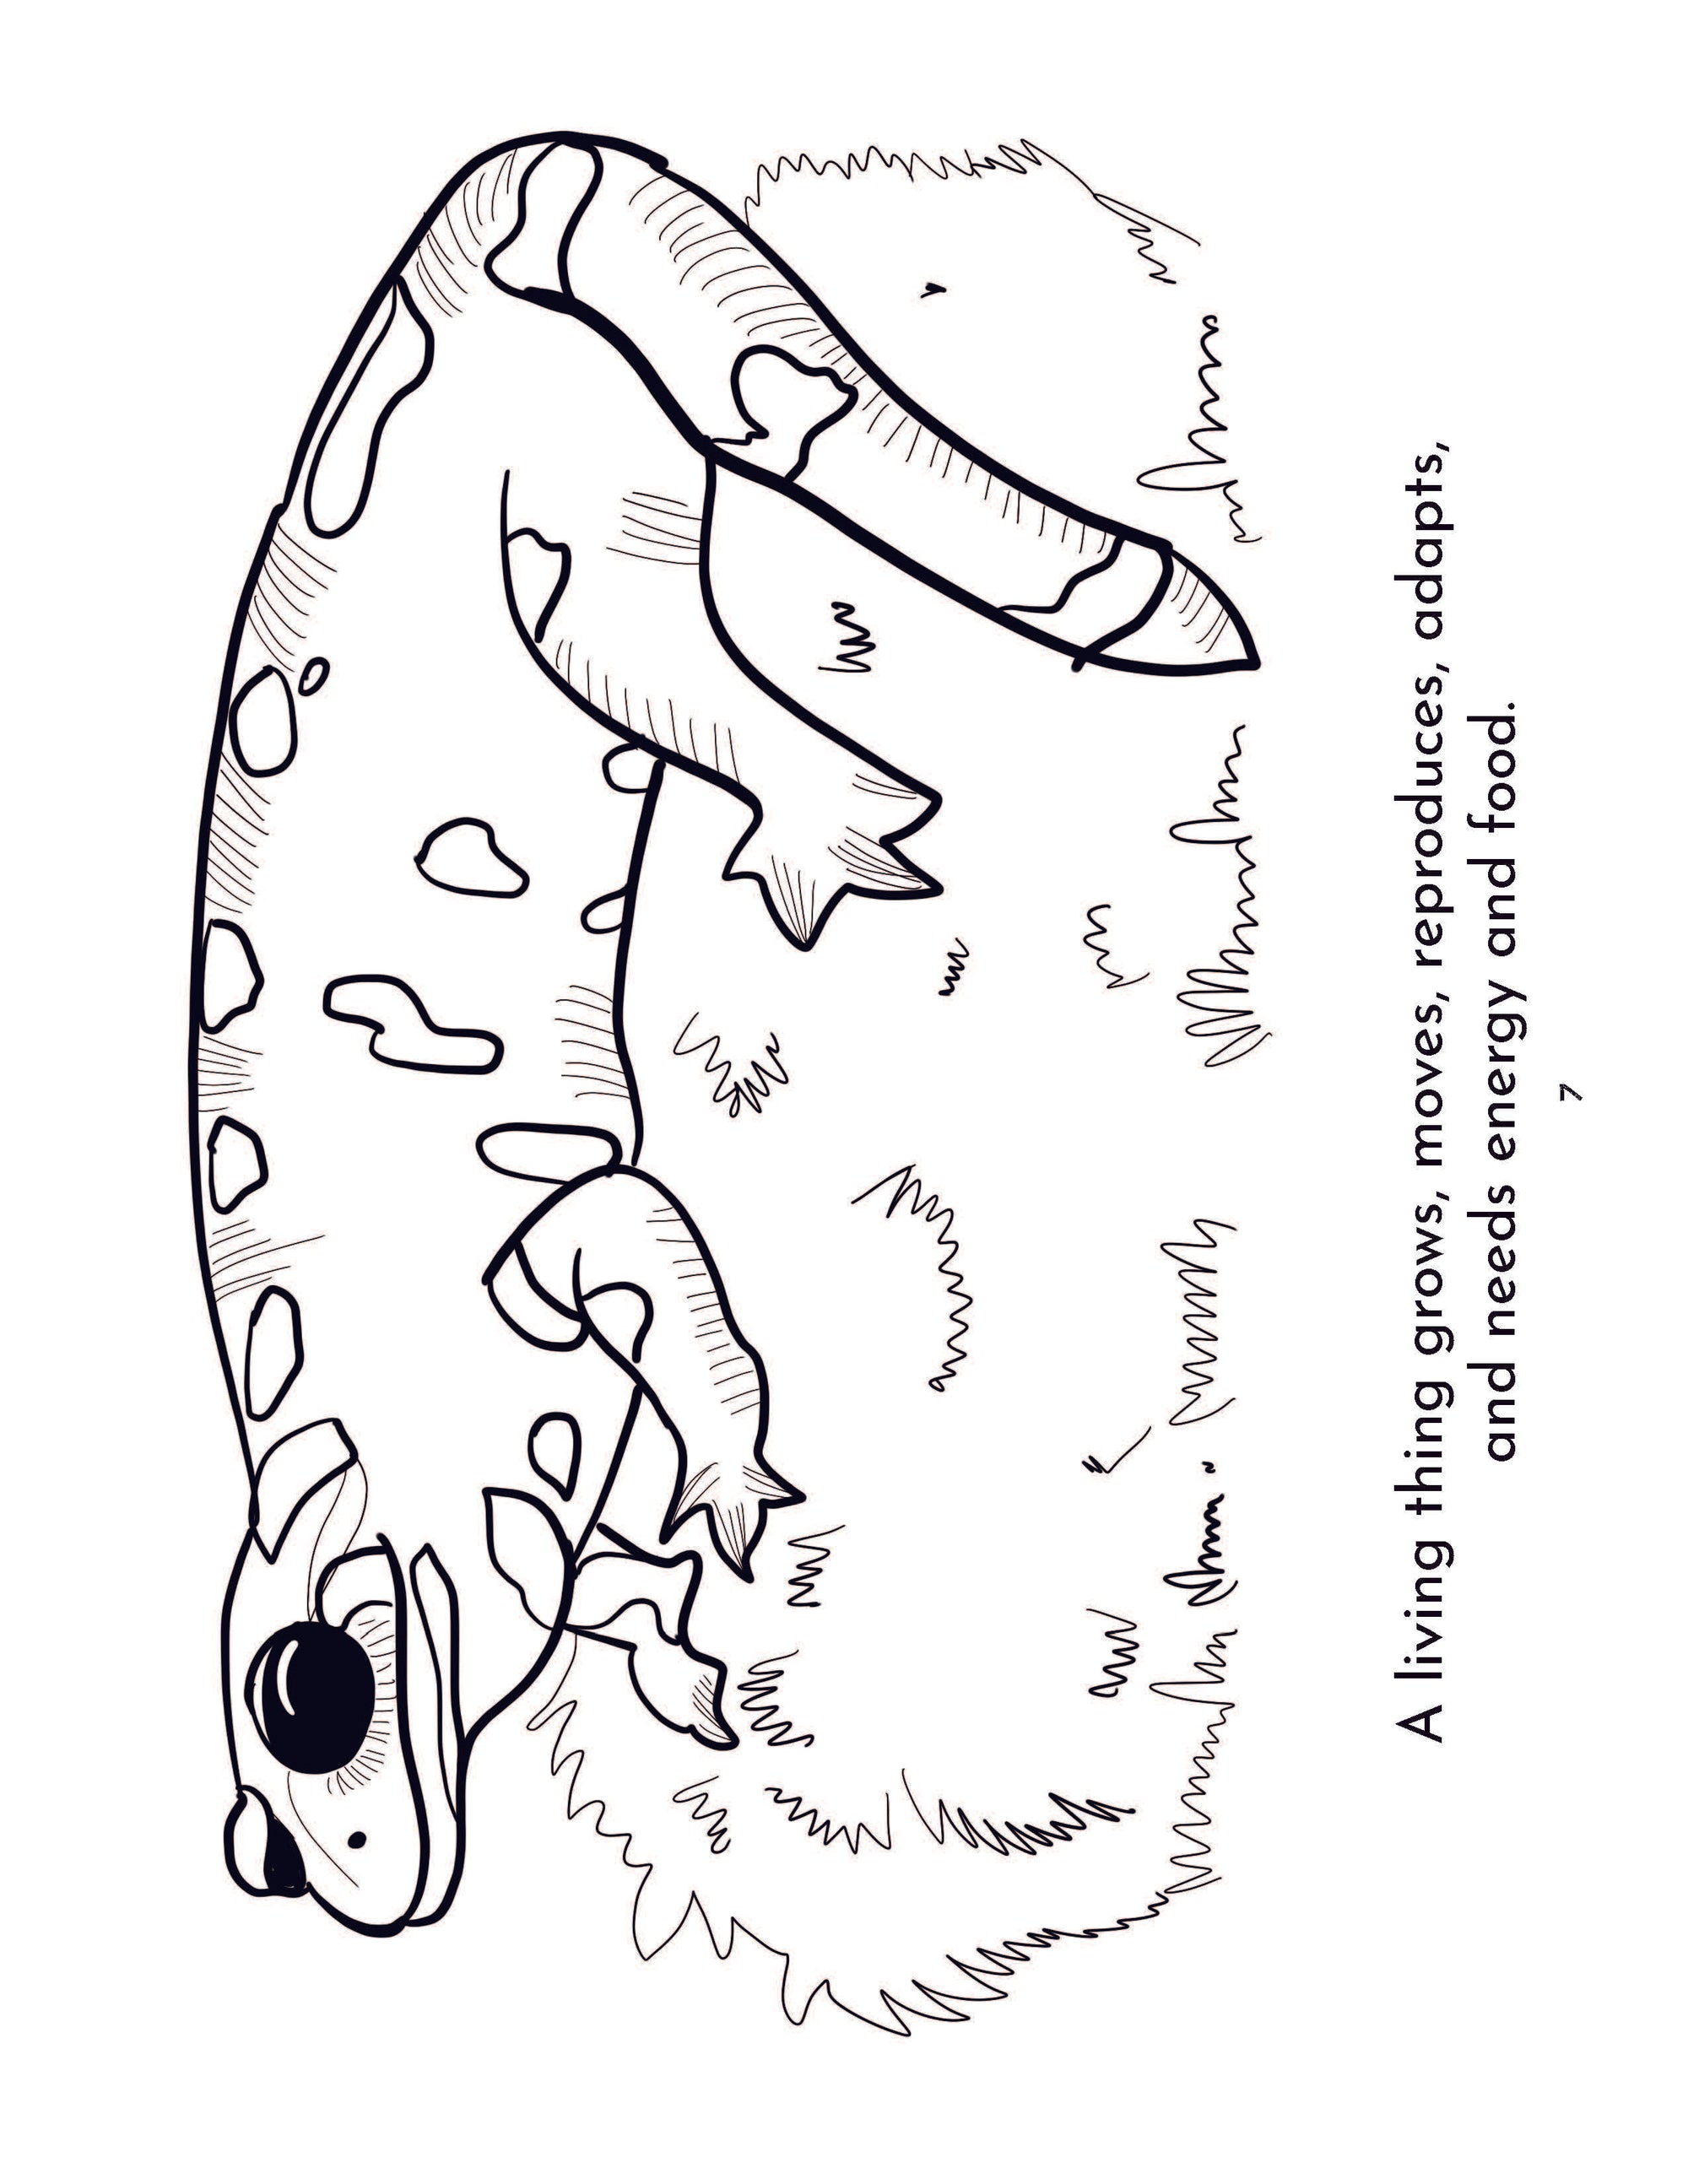 Biology coloring pages